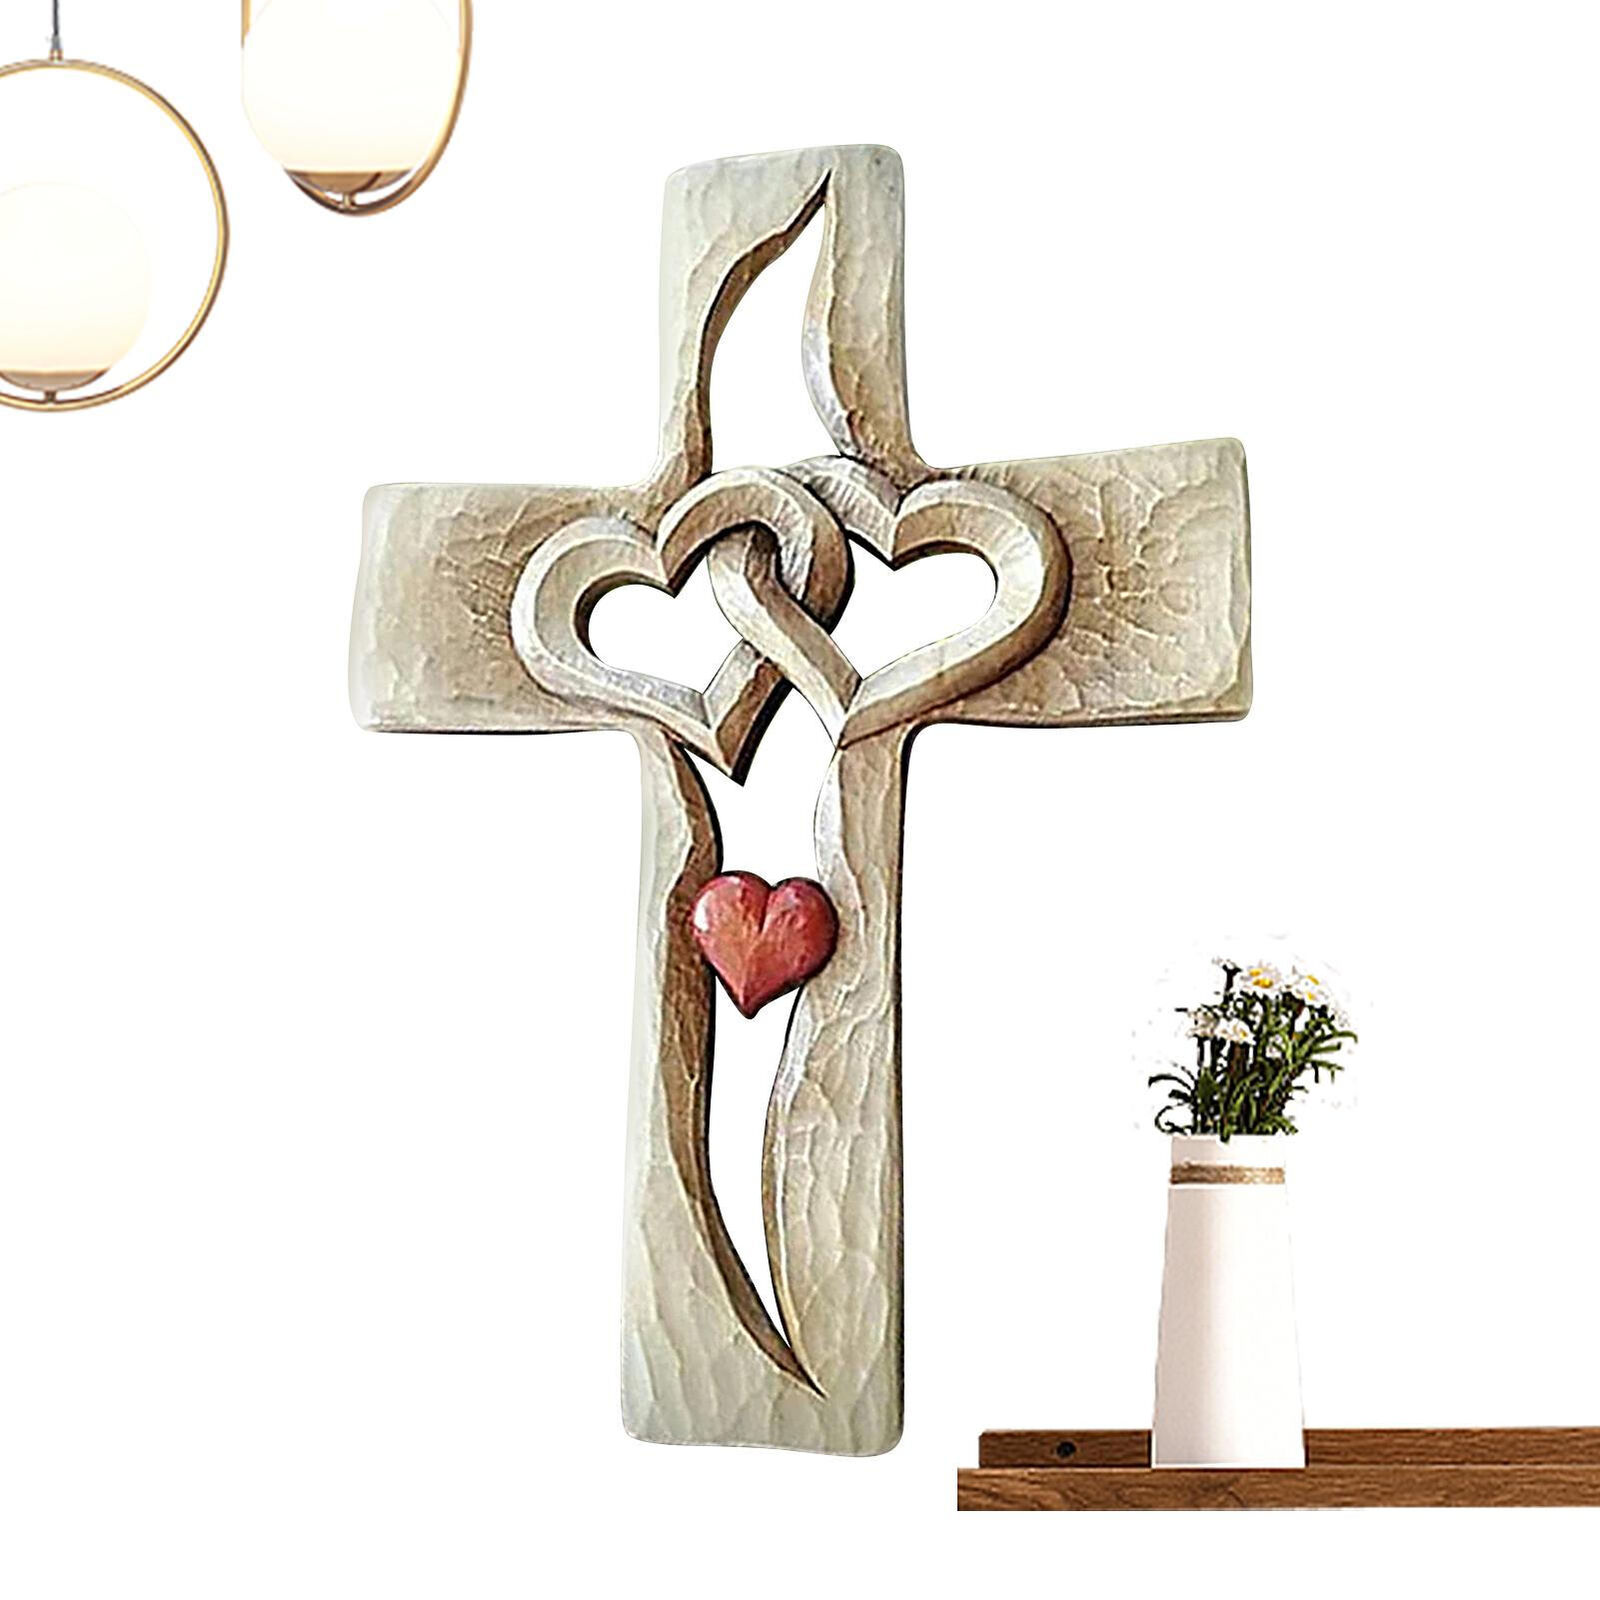 Wooden Entwined Heart Cross Intertwined Hearts Wall Hangings Cross for Home